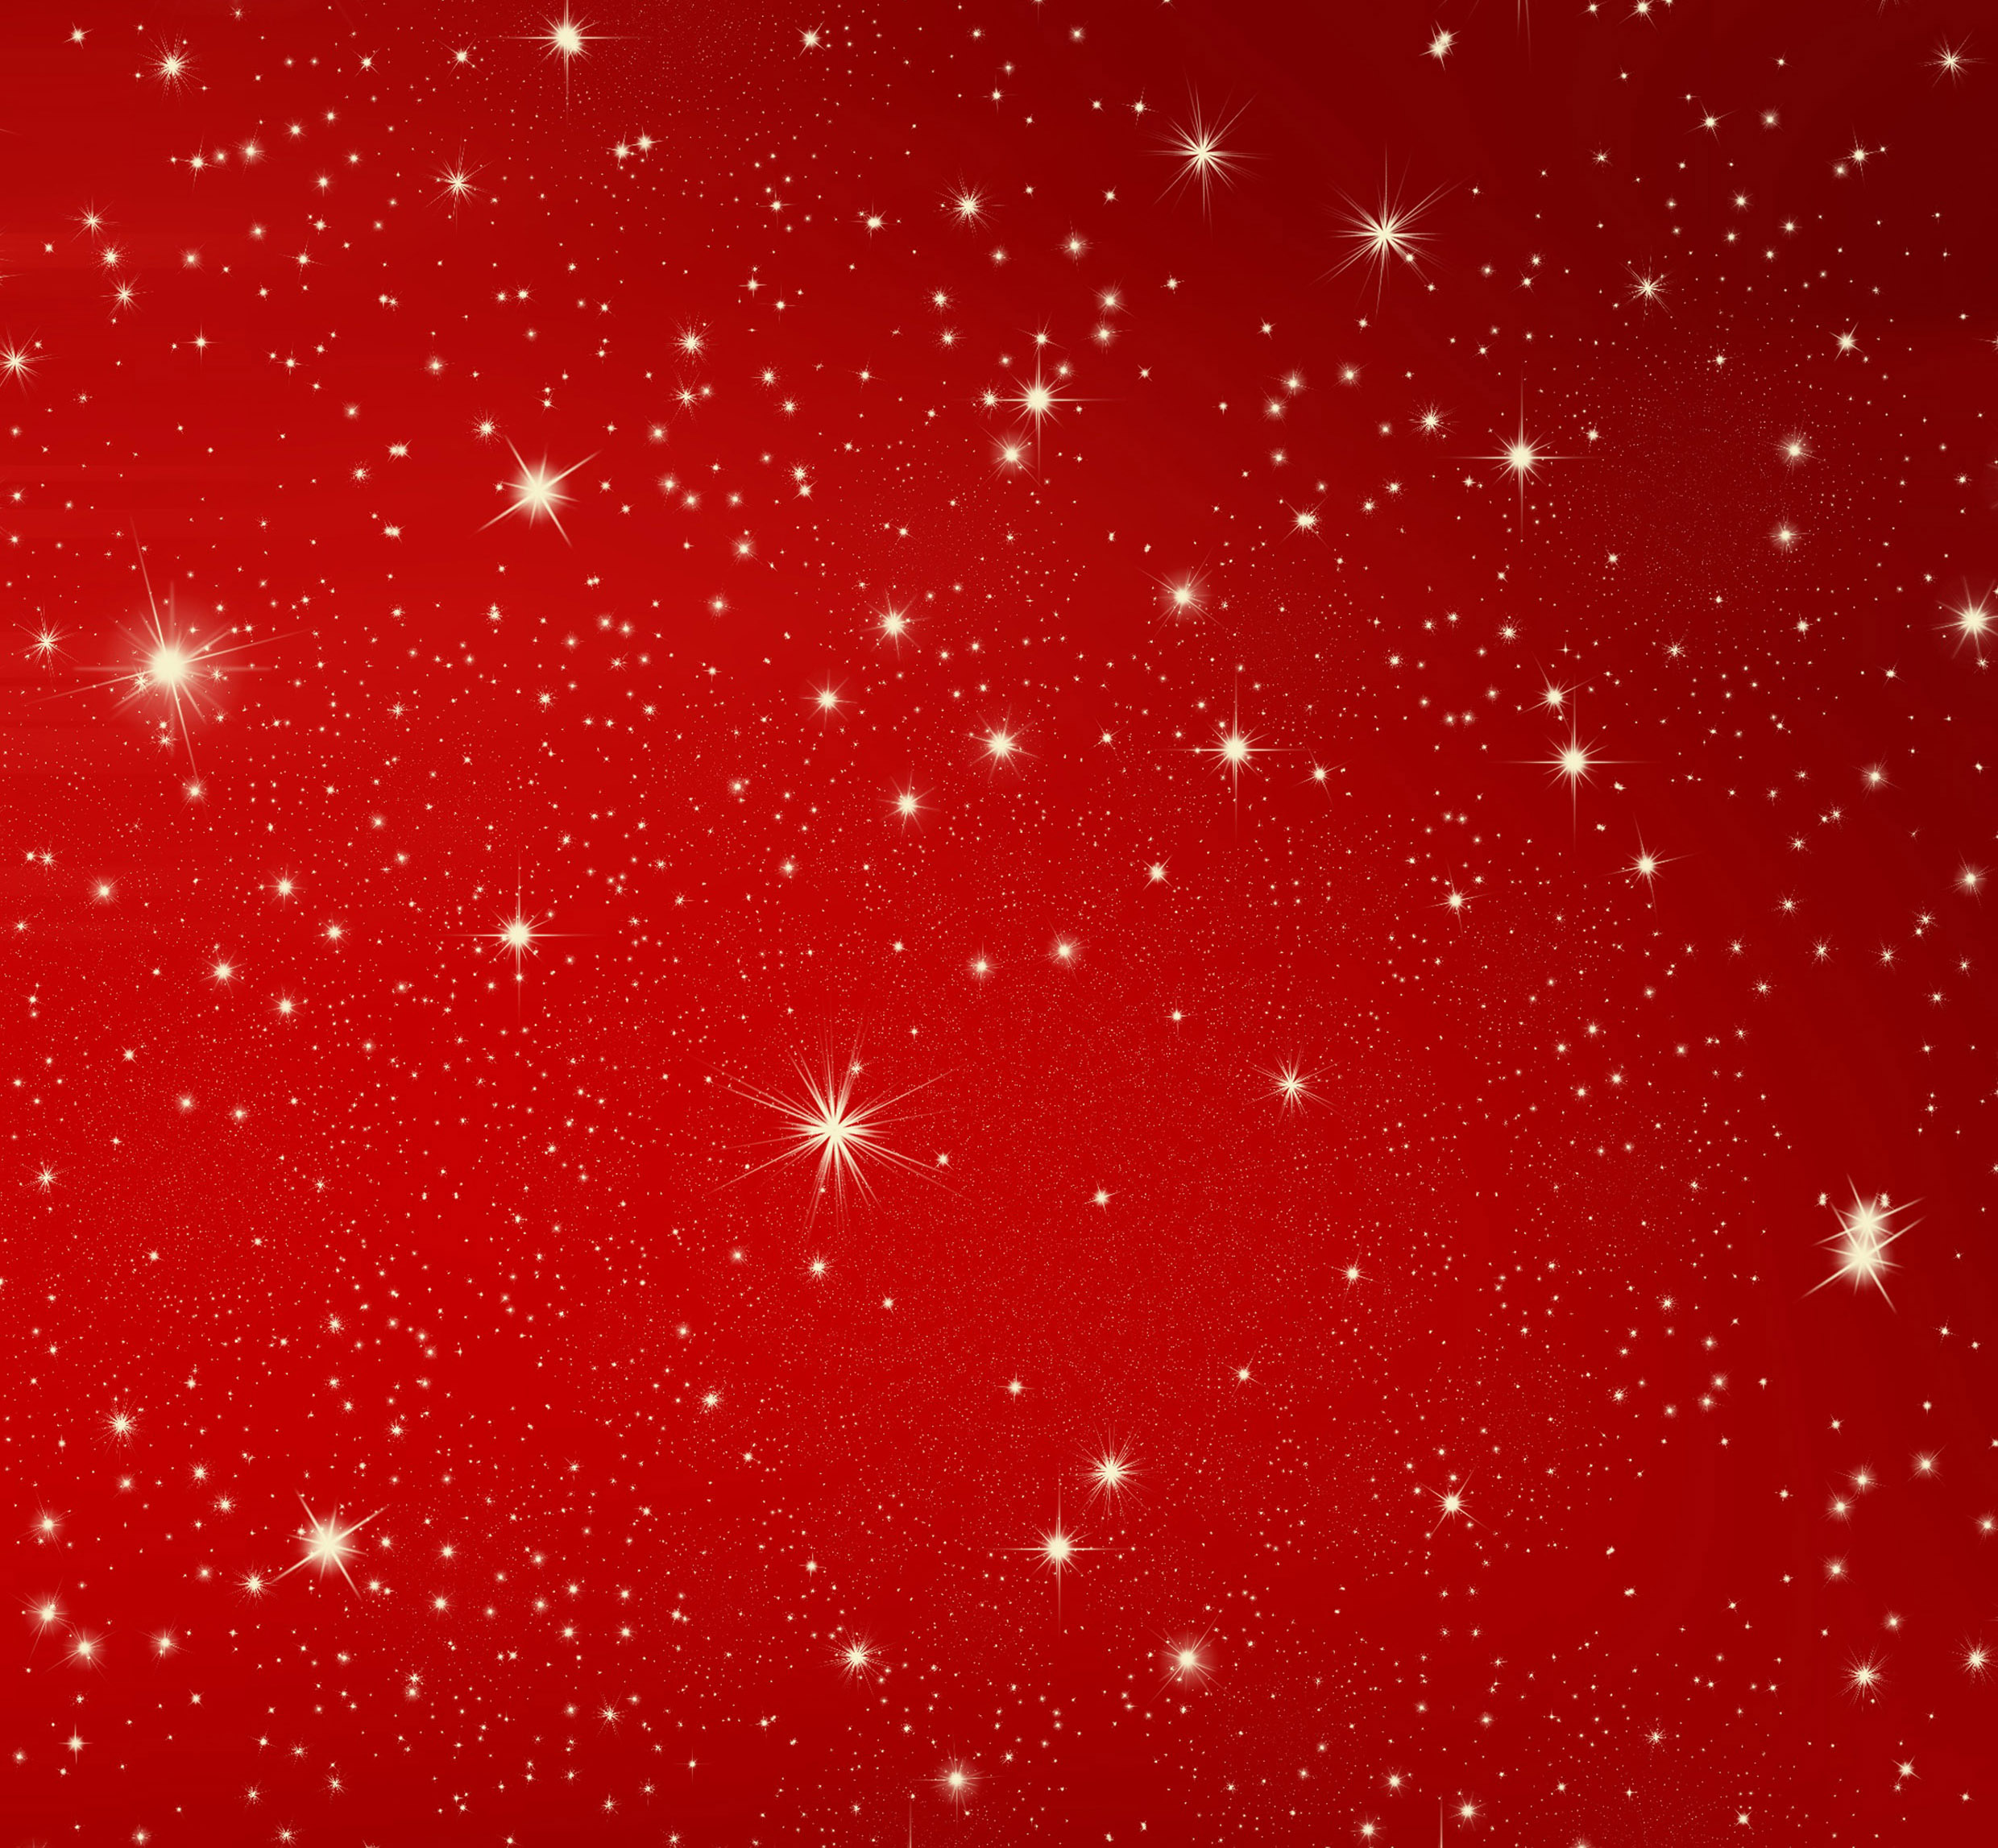 Christmas Star Background Image Amp Pictures Becuo